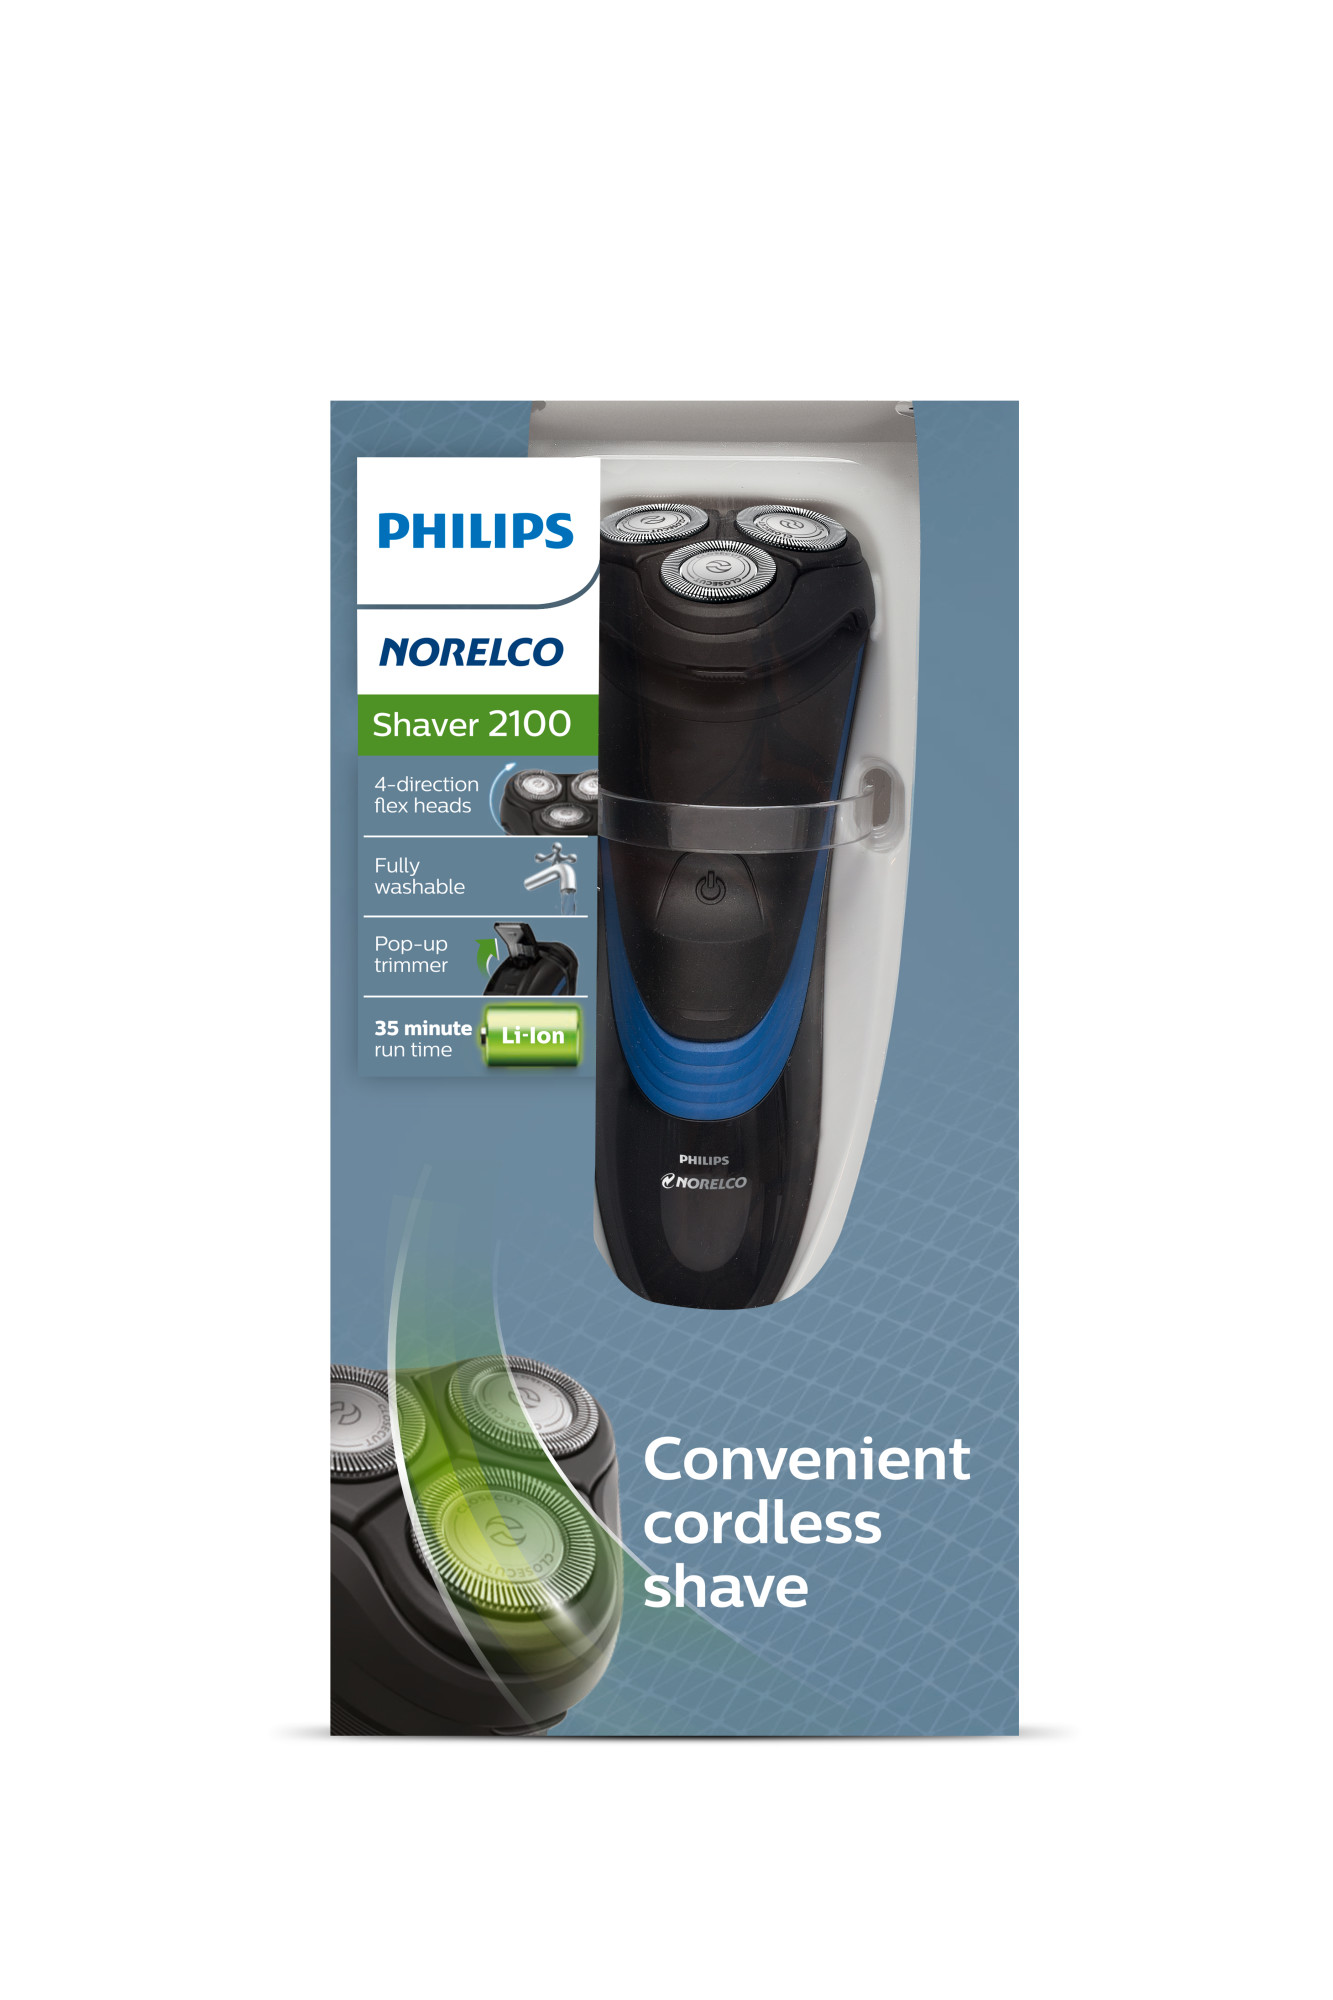 Philips Norelco Series 2000 Electric Shaver 2100, S1560/81 - image 3 of 4